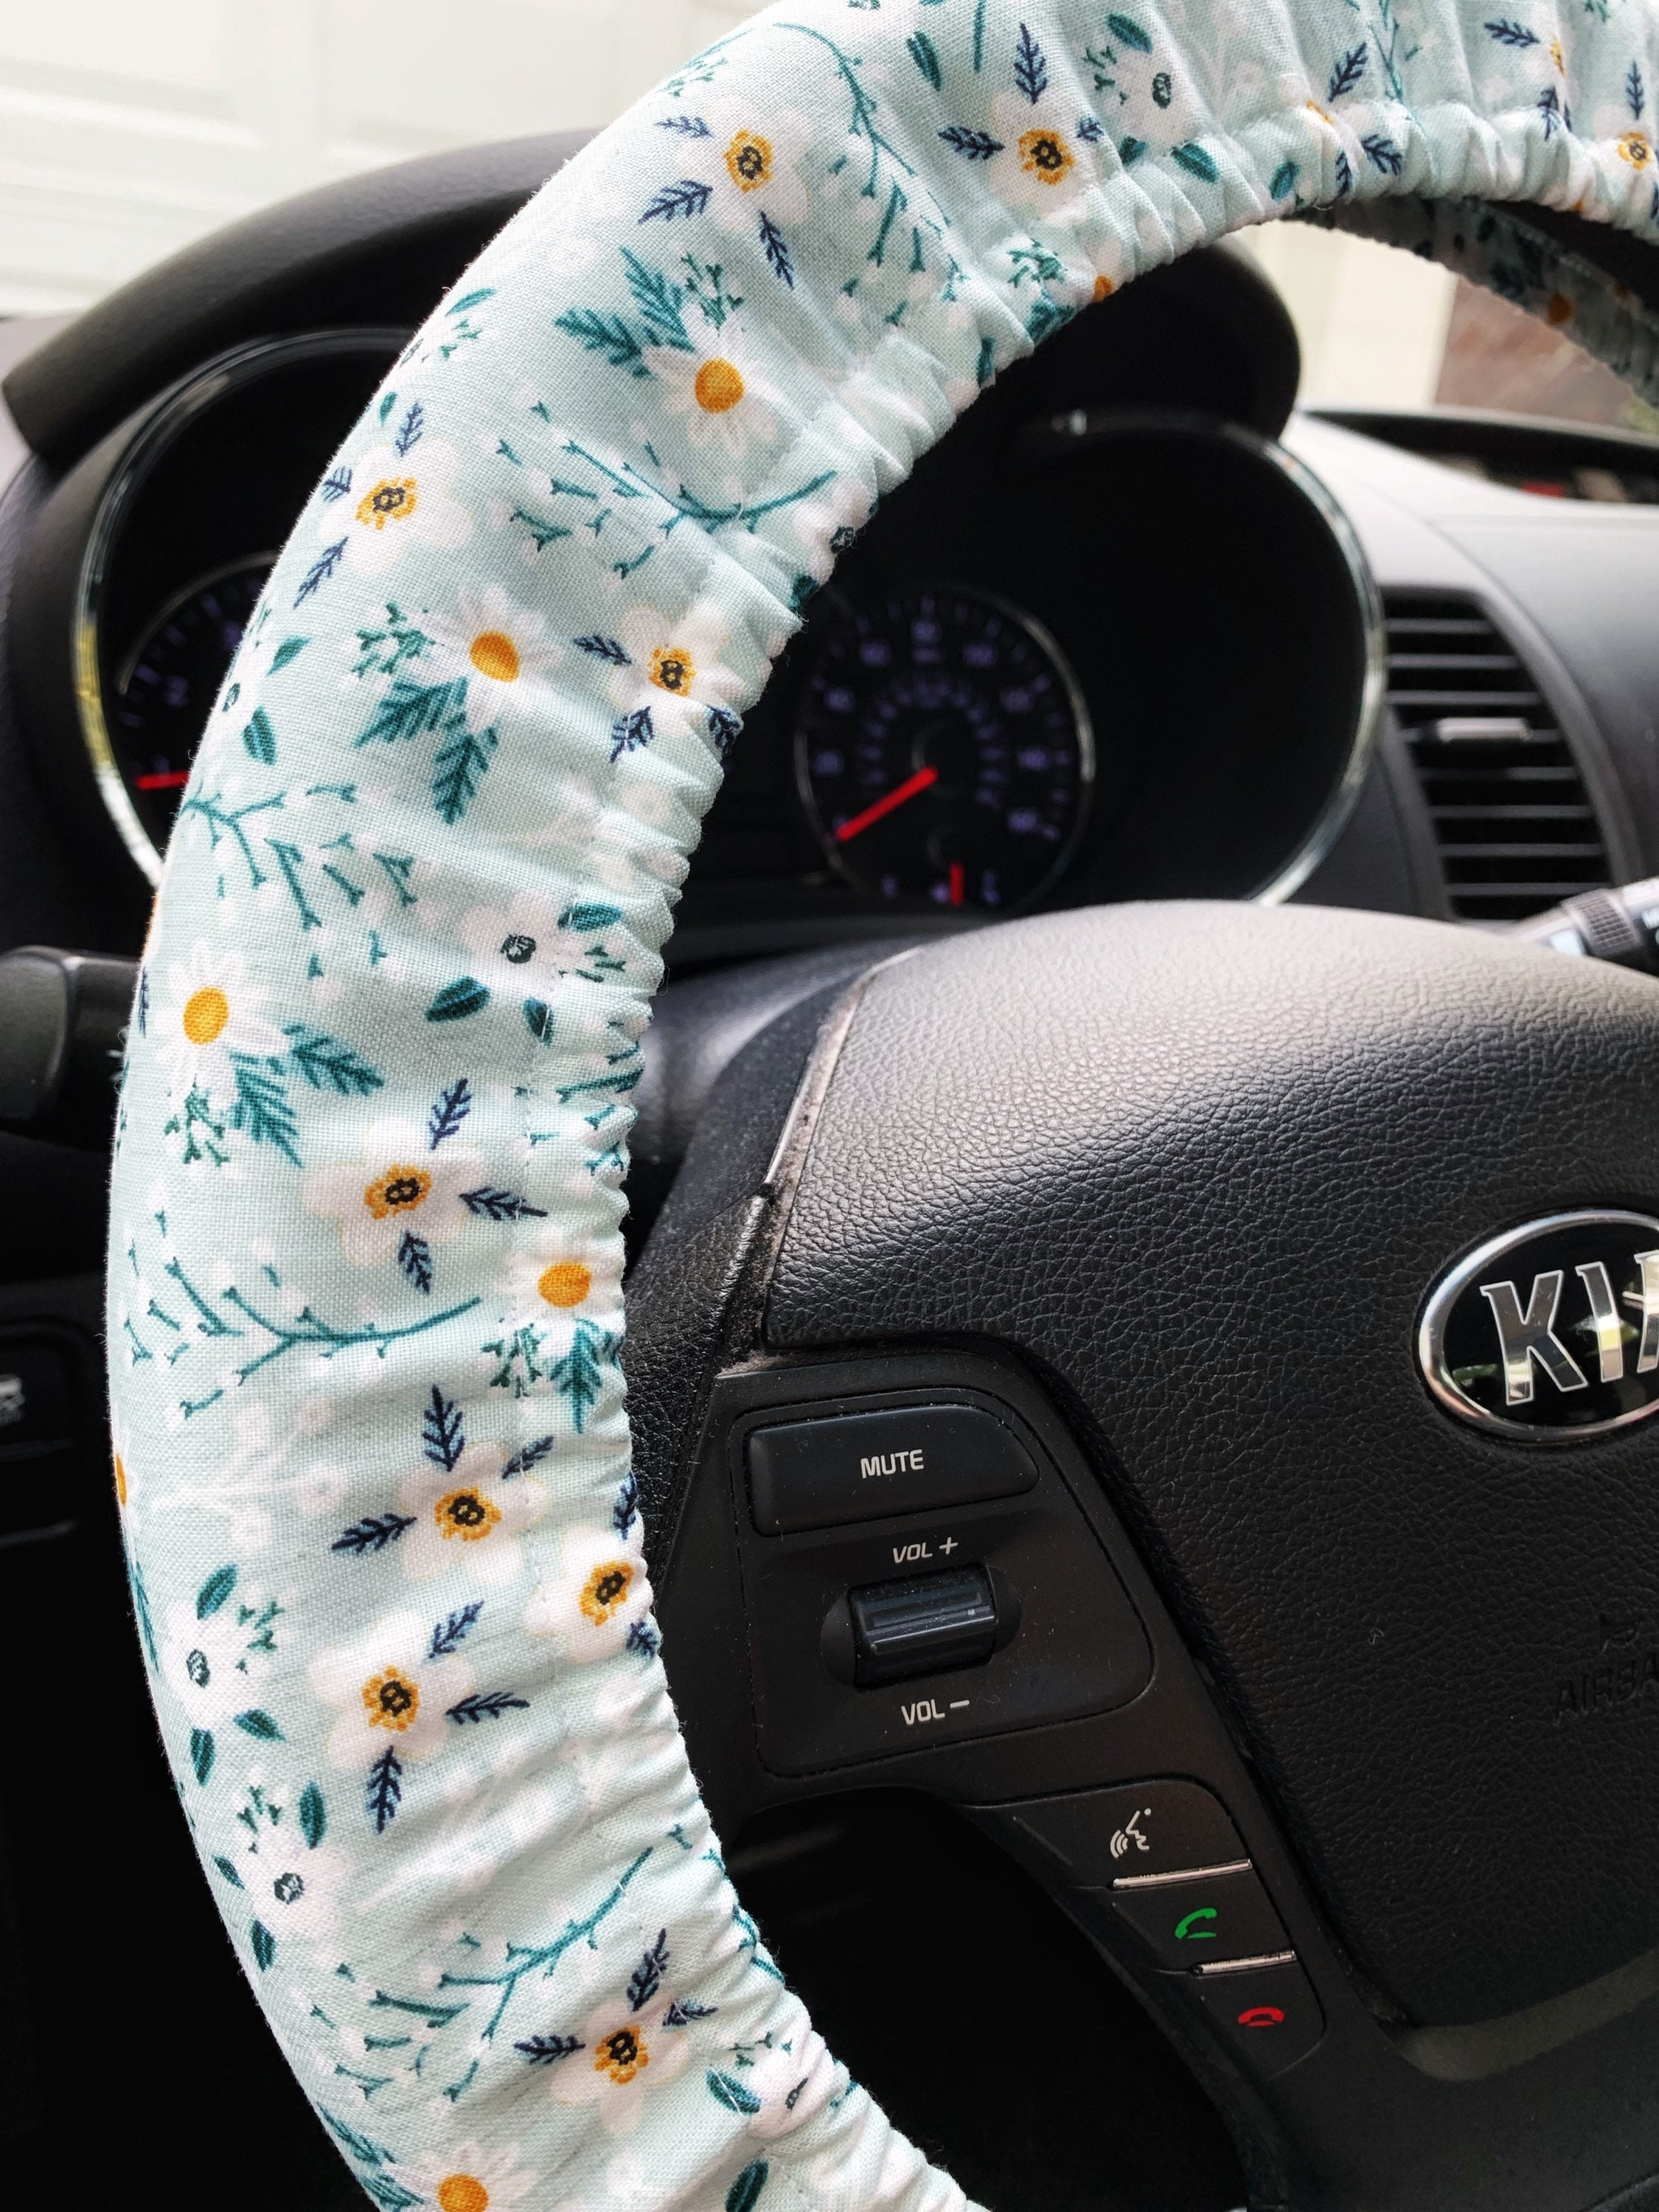 Mint Green Steering Wheel Cover sold by Colin Kelly, SKU 40413166